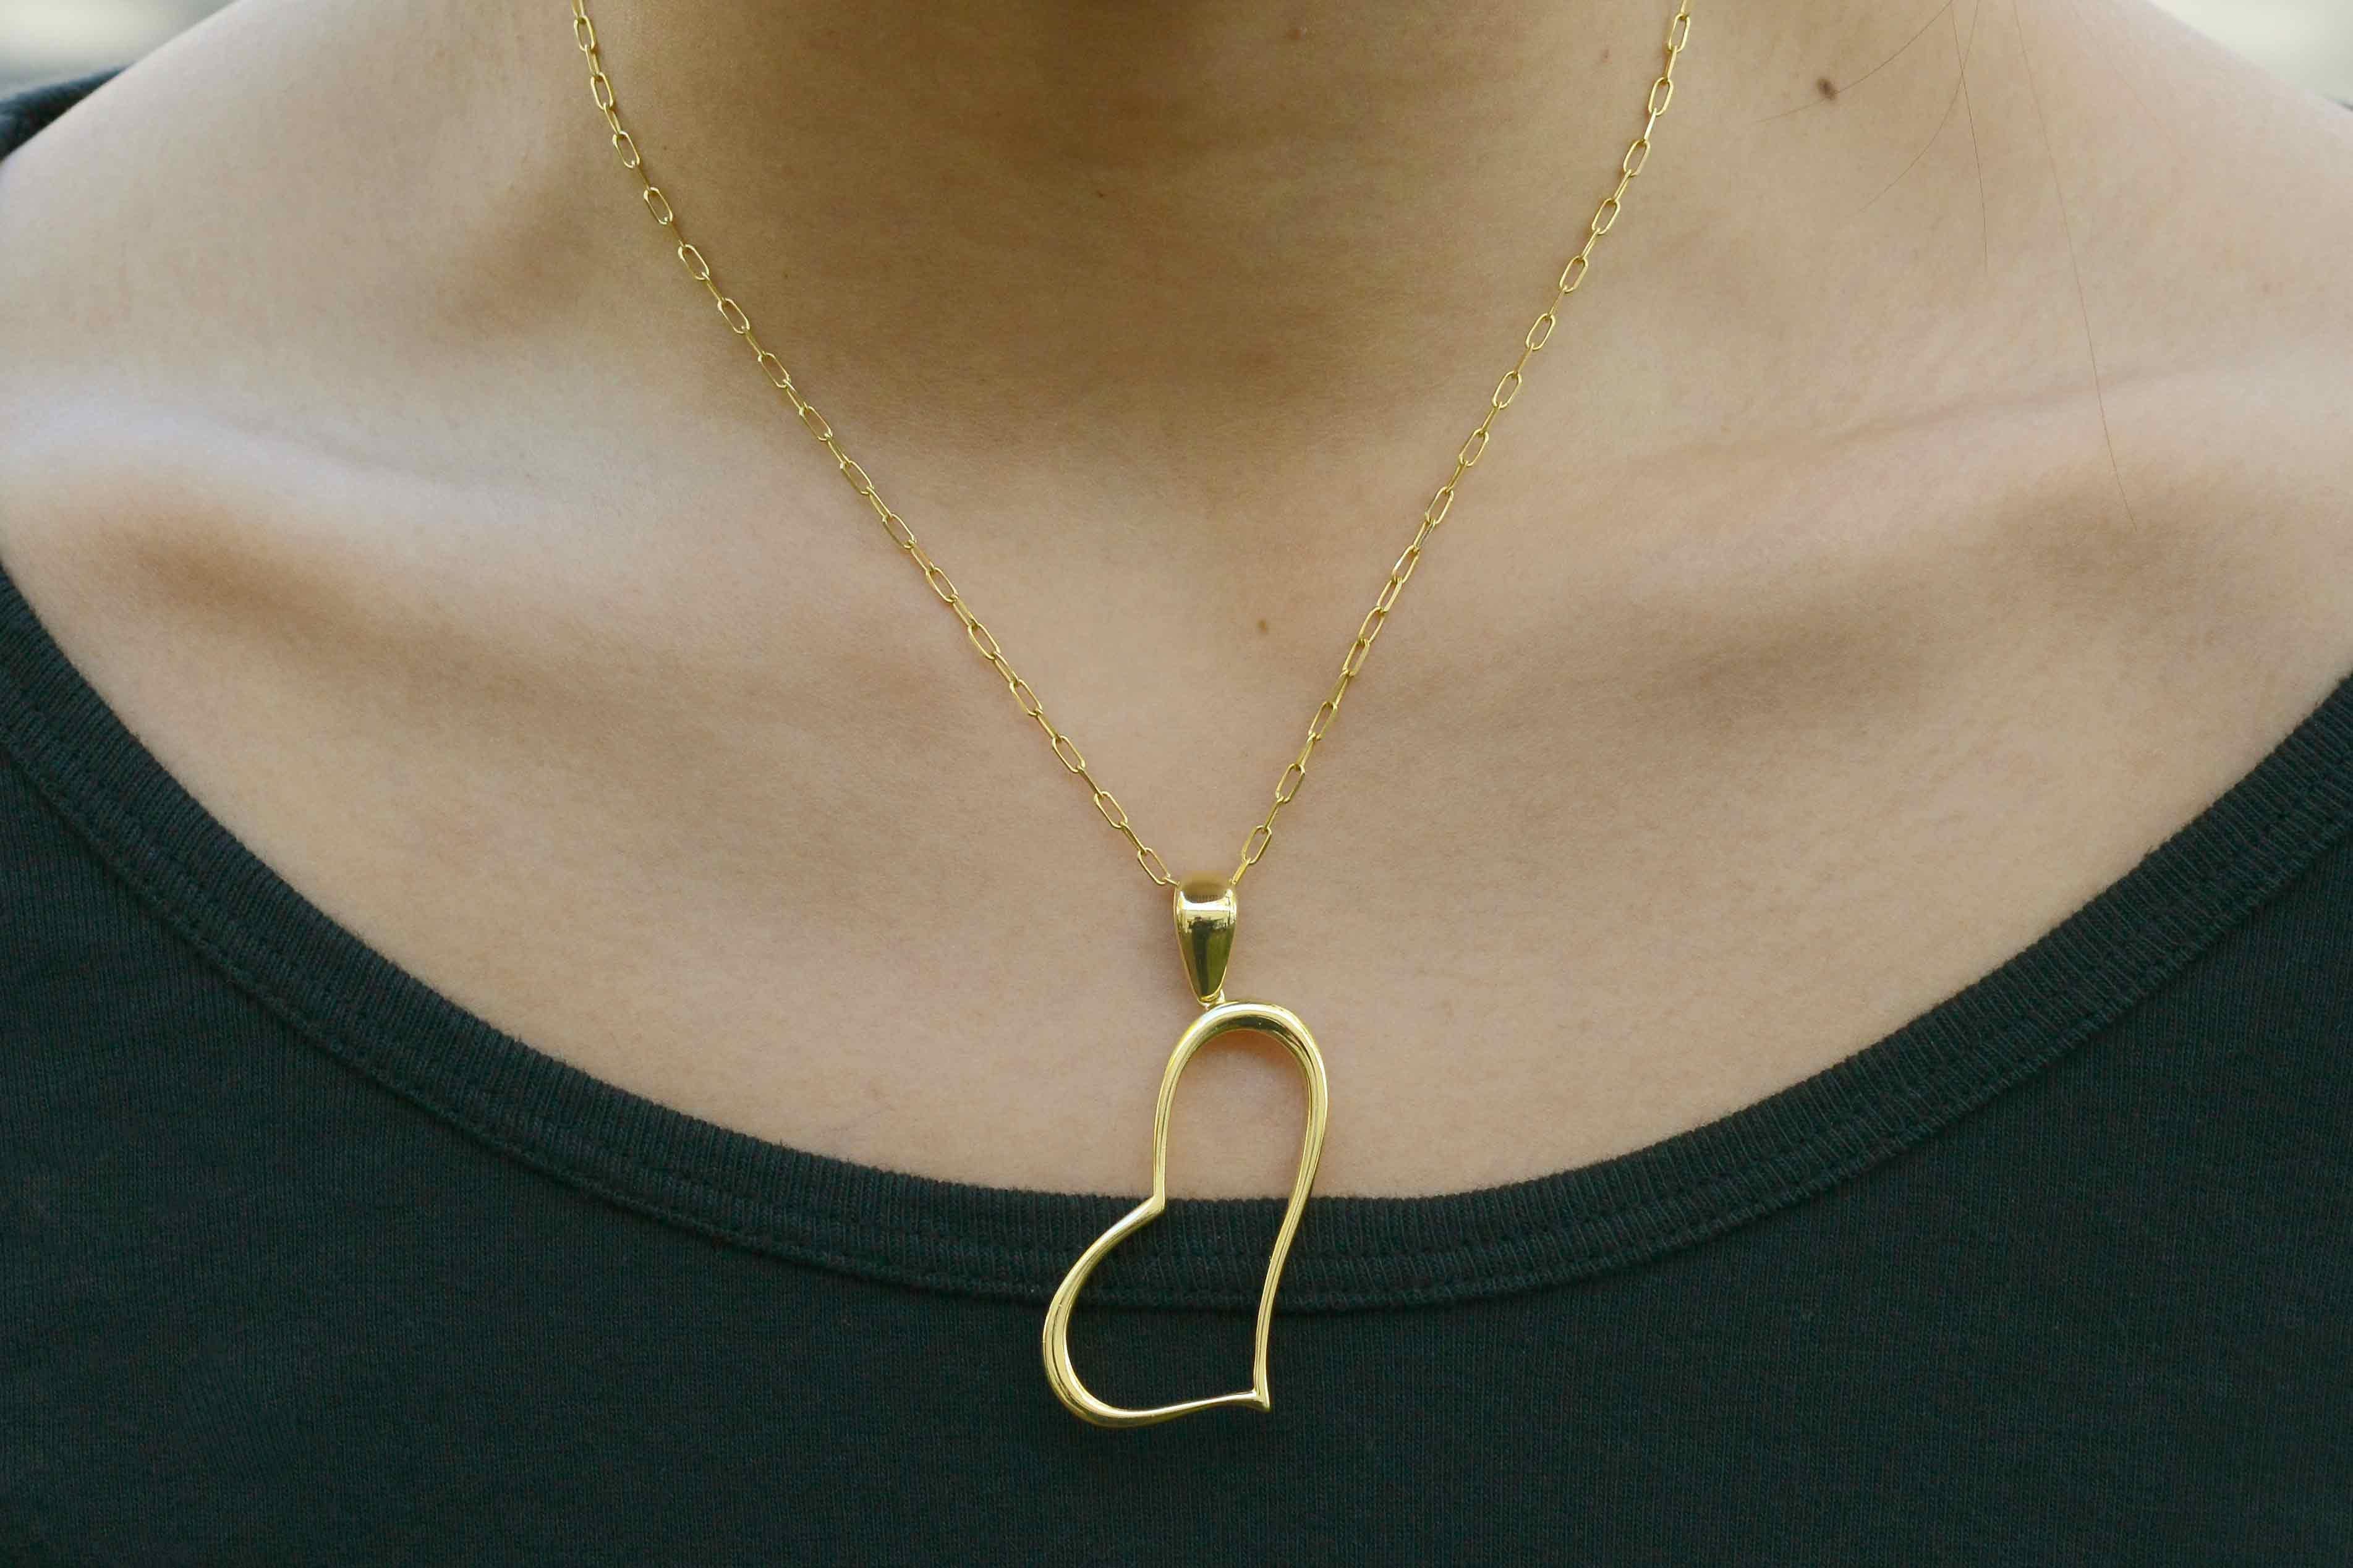 A lovingly chic 1980s vintage abstract heart pendant. A finely polished, buttery and heavy 18k yellow gold gives this bold accessory an eye catching appeal. The sizable bail (loop) allows for wearing on all widths of chains and the sleek design